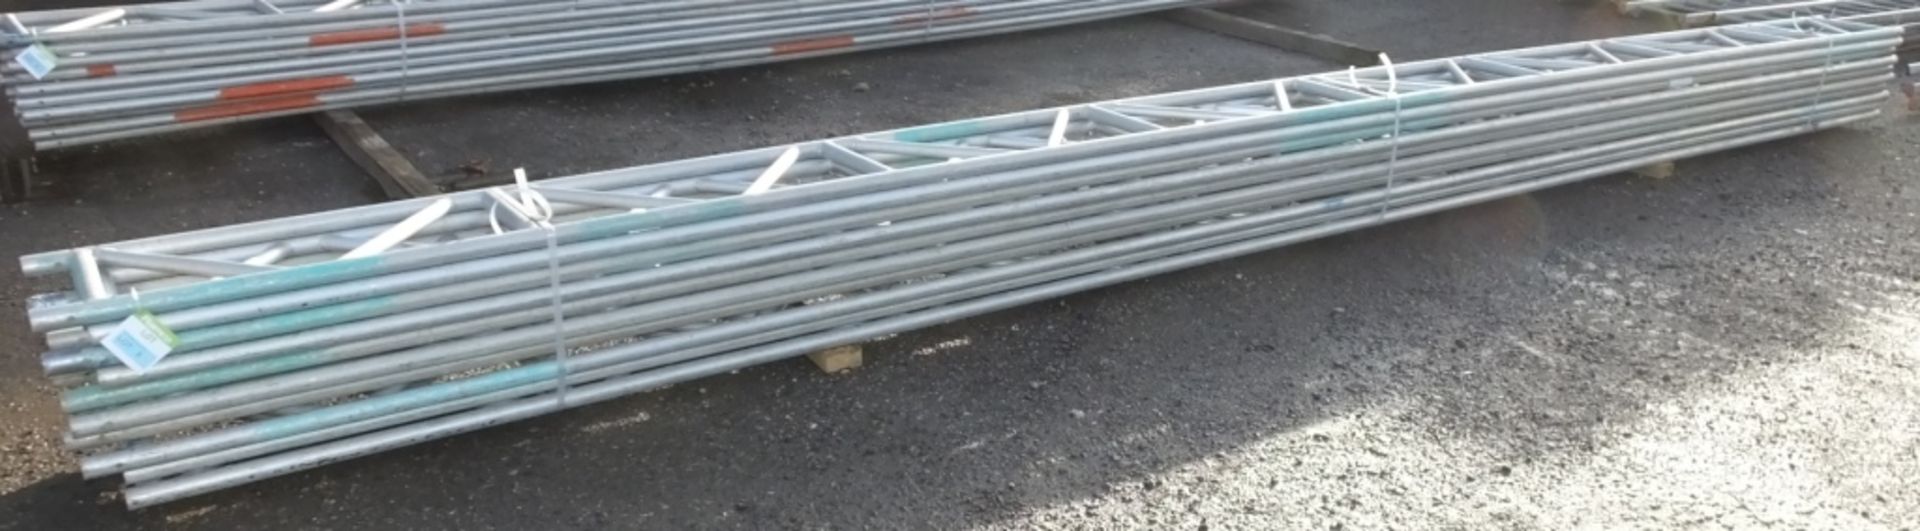 10x 8M Layher Ladder Beams - Staging Board sections - Unit Beam SS400 8.0M